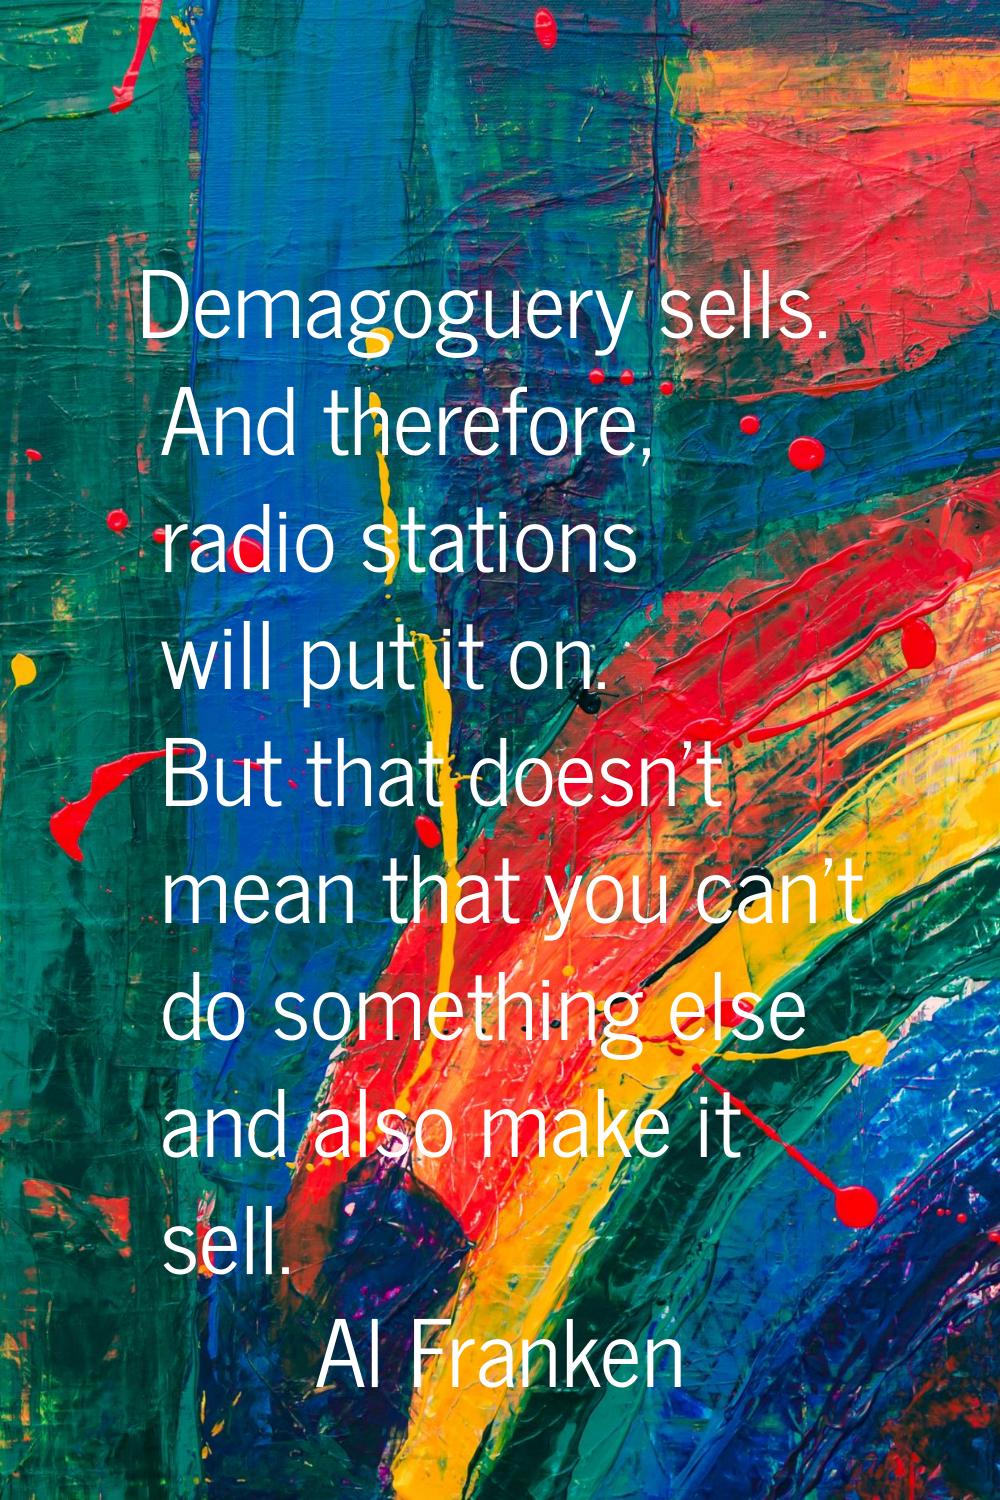 Demagoguery sells. And therefore, radio stations will put it on. But that doesn't mean that you can